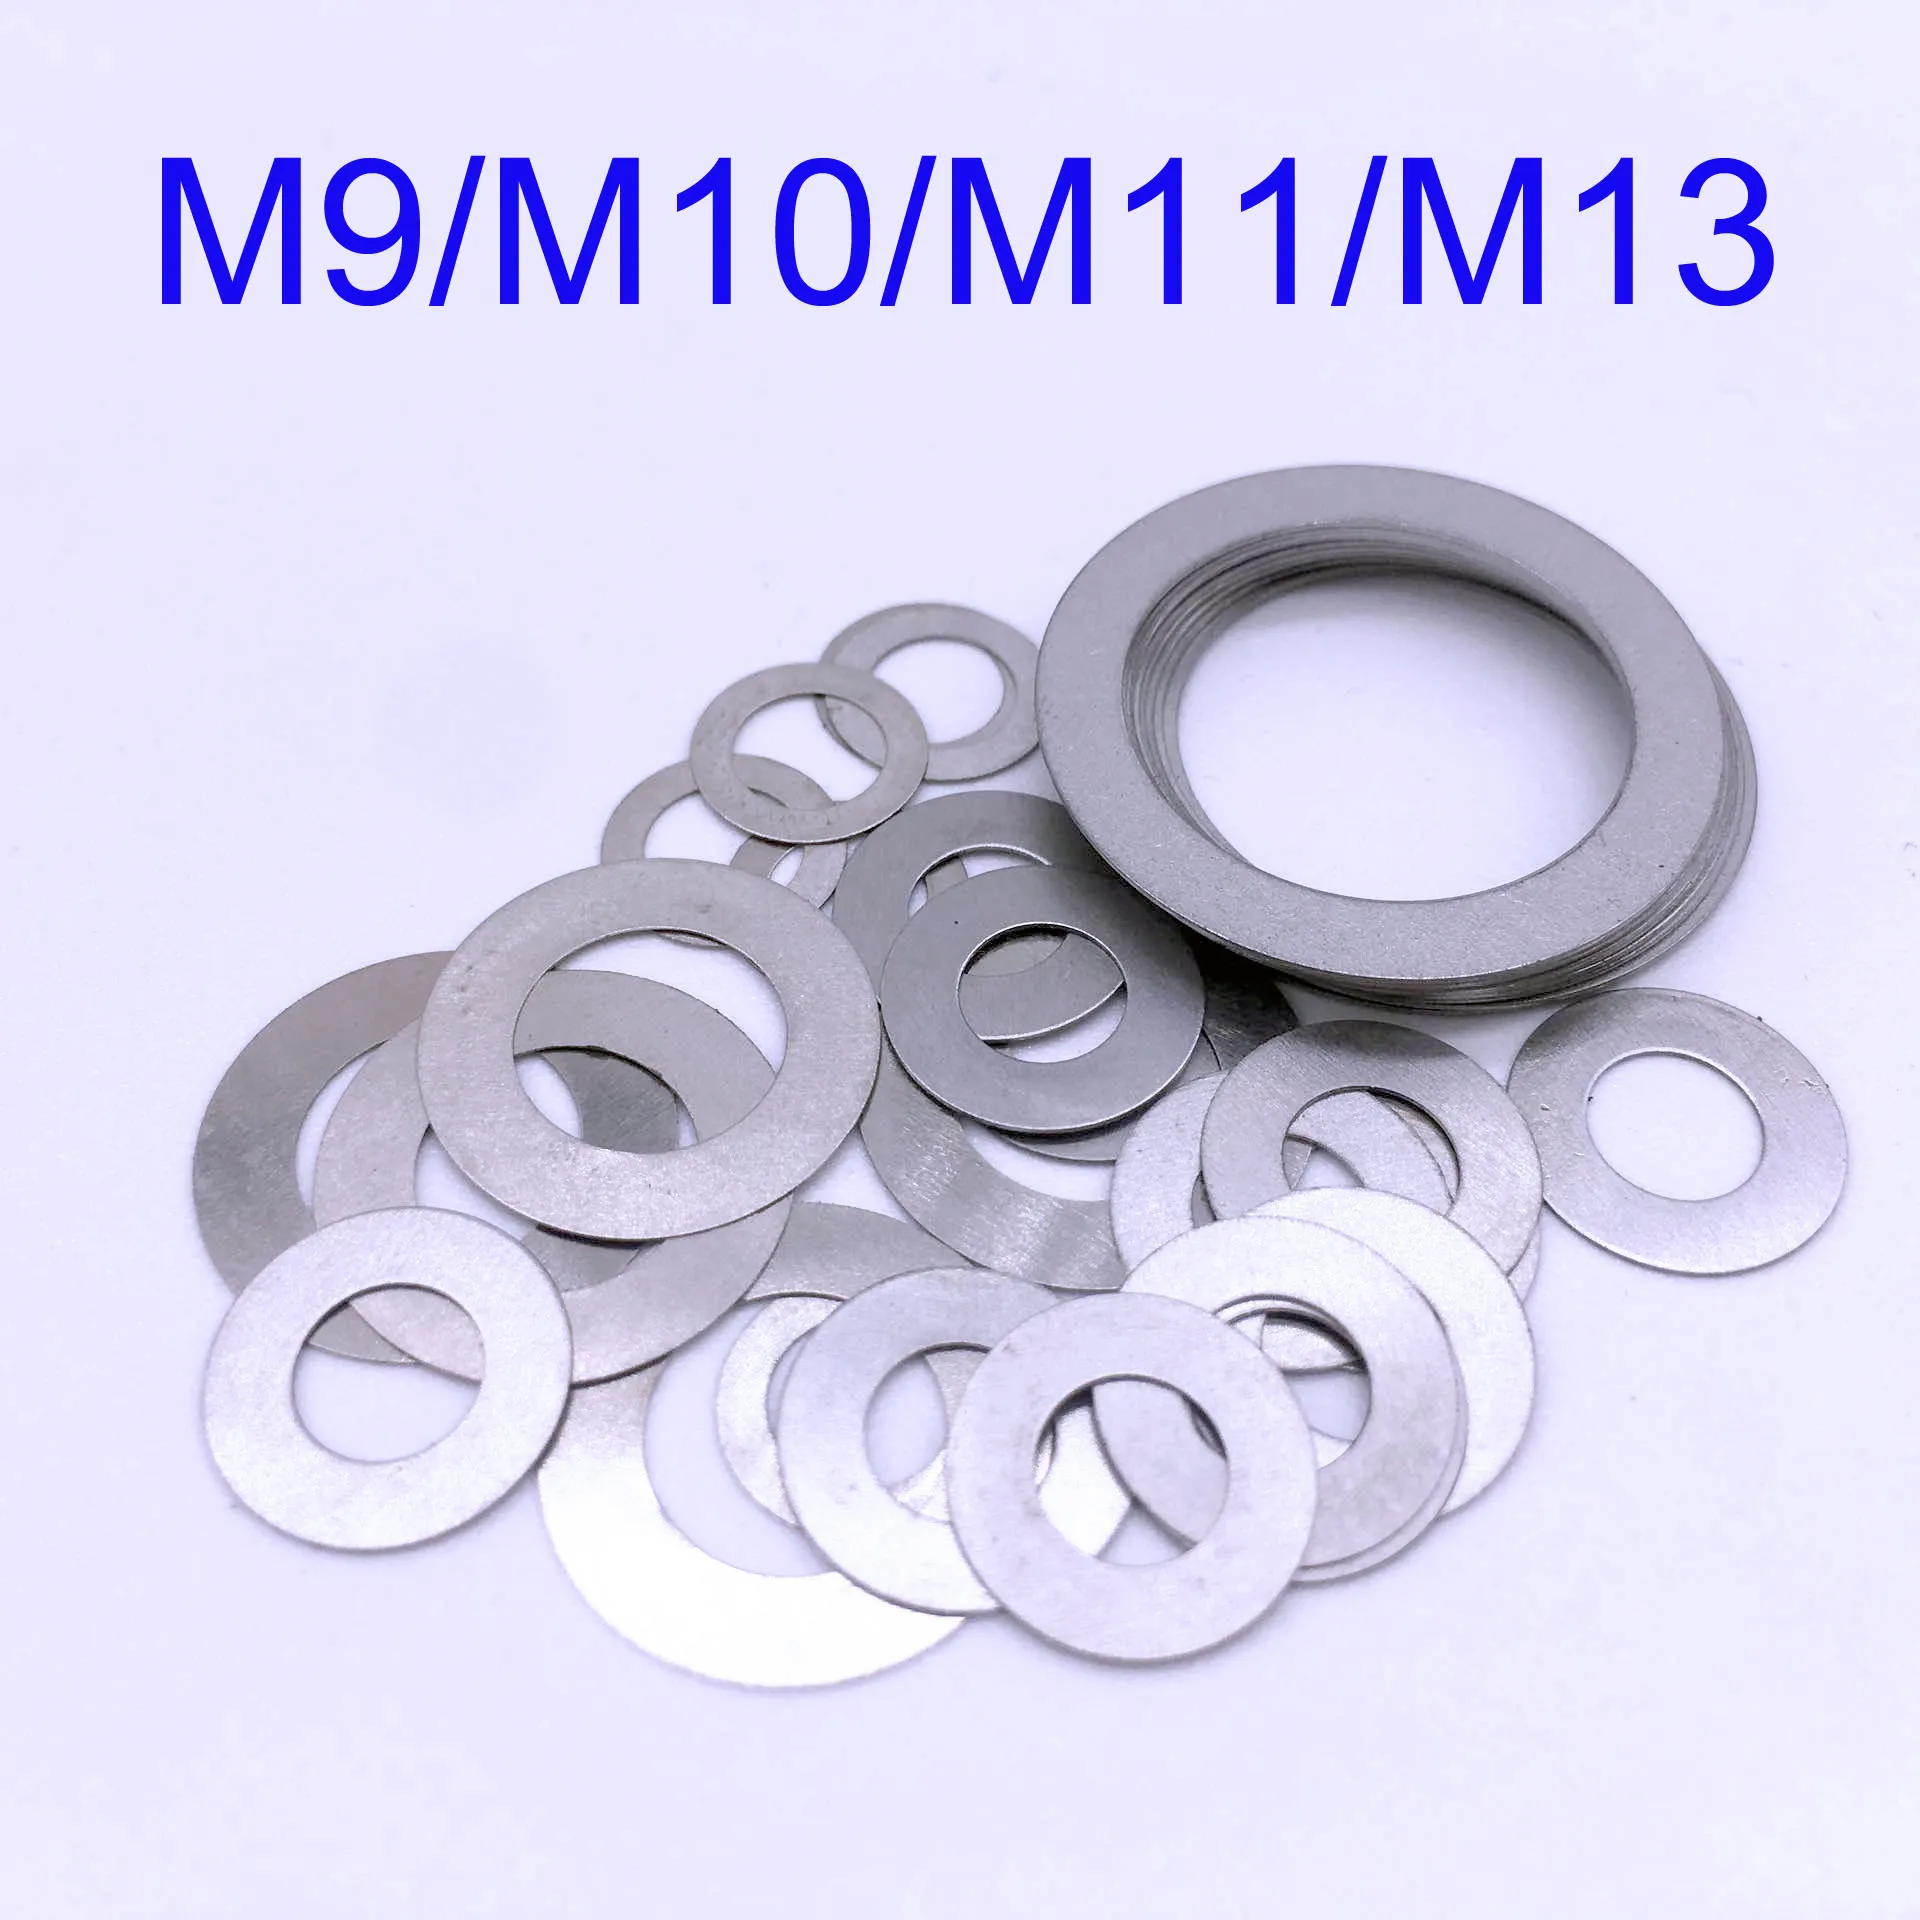 A2 Stainless Steel Shim Washers Flat Shims Thick 0.1 0.2 0.25 0.5 1 2mm DIN 988 